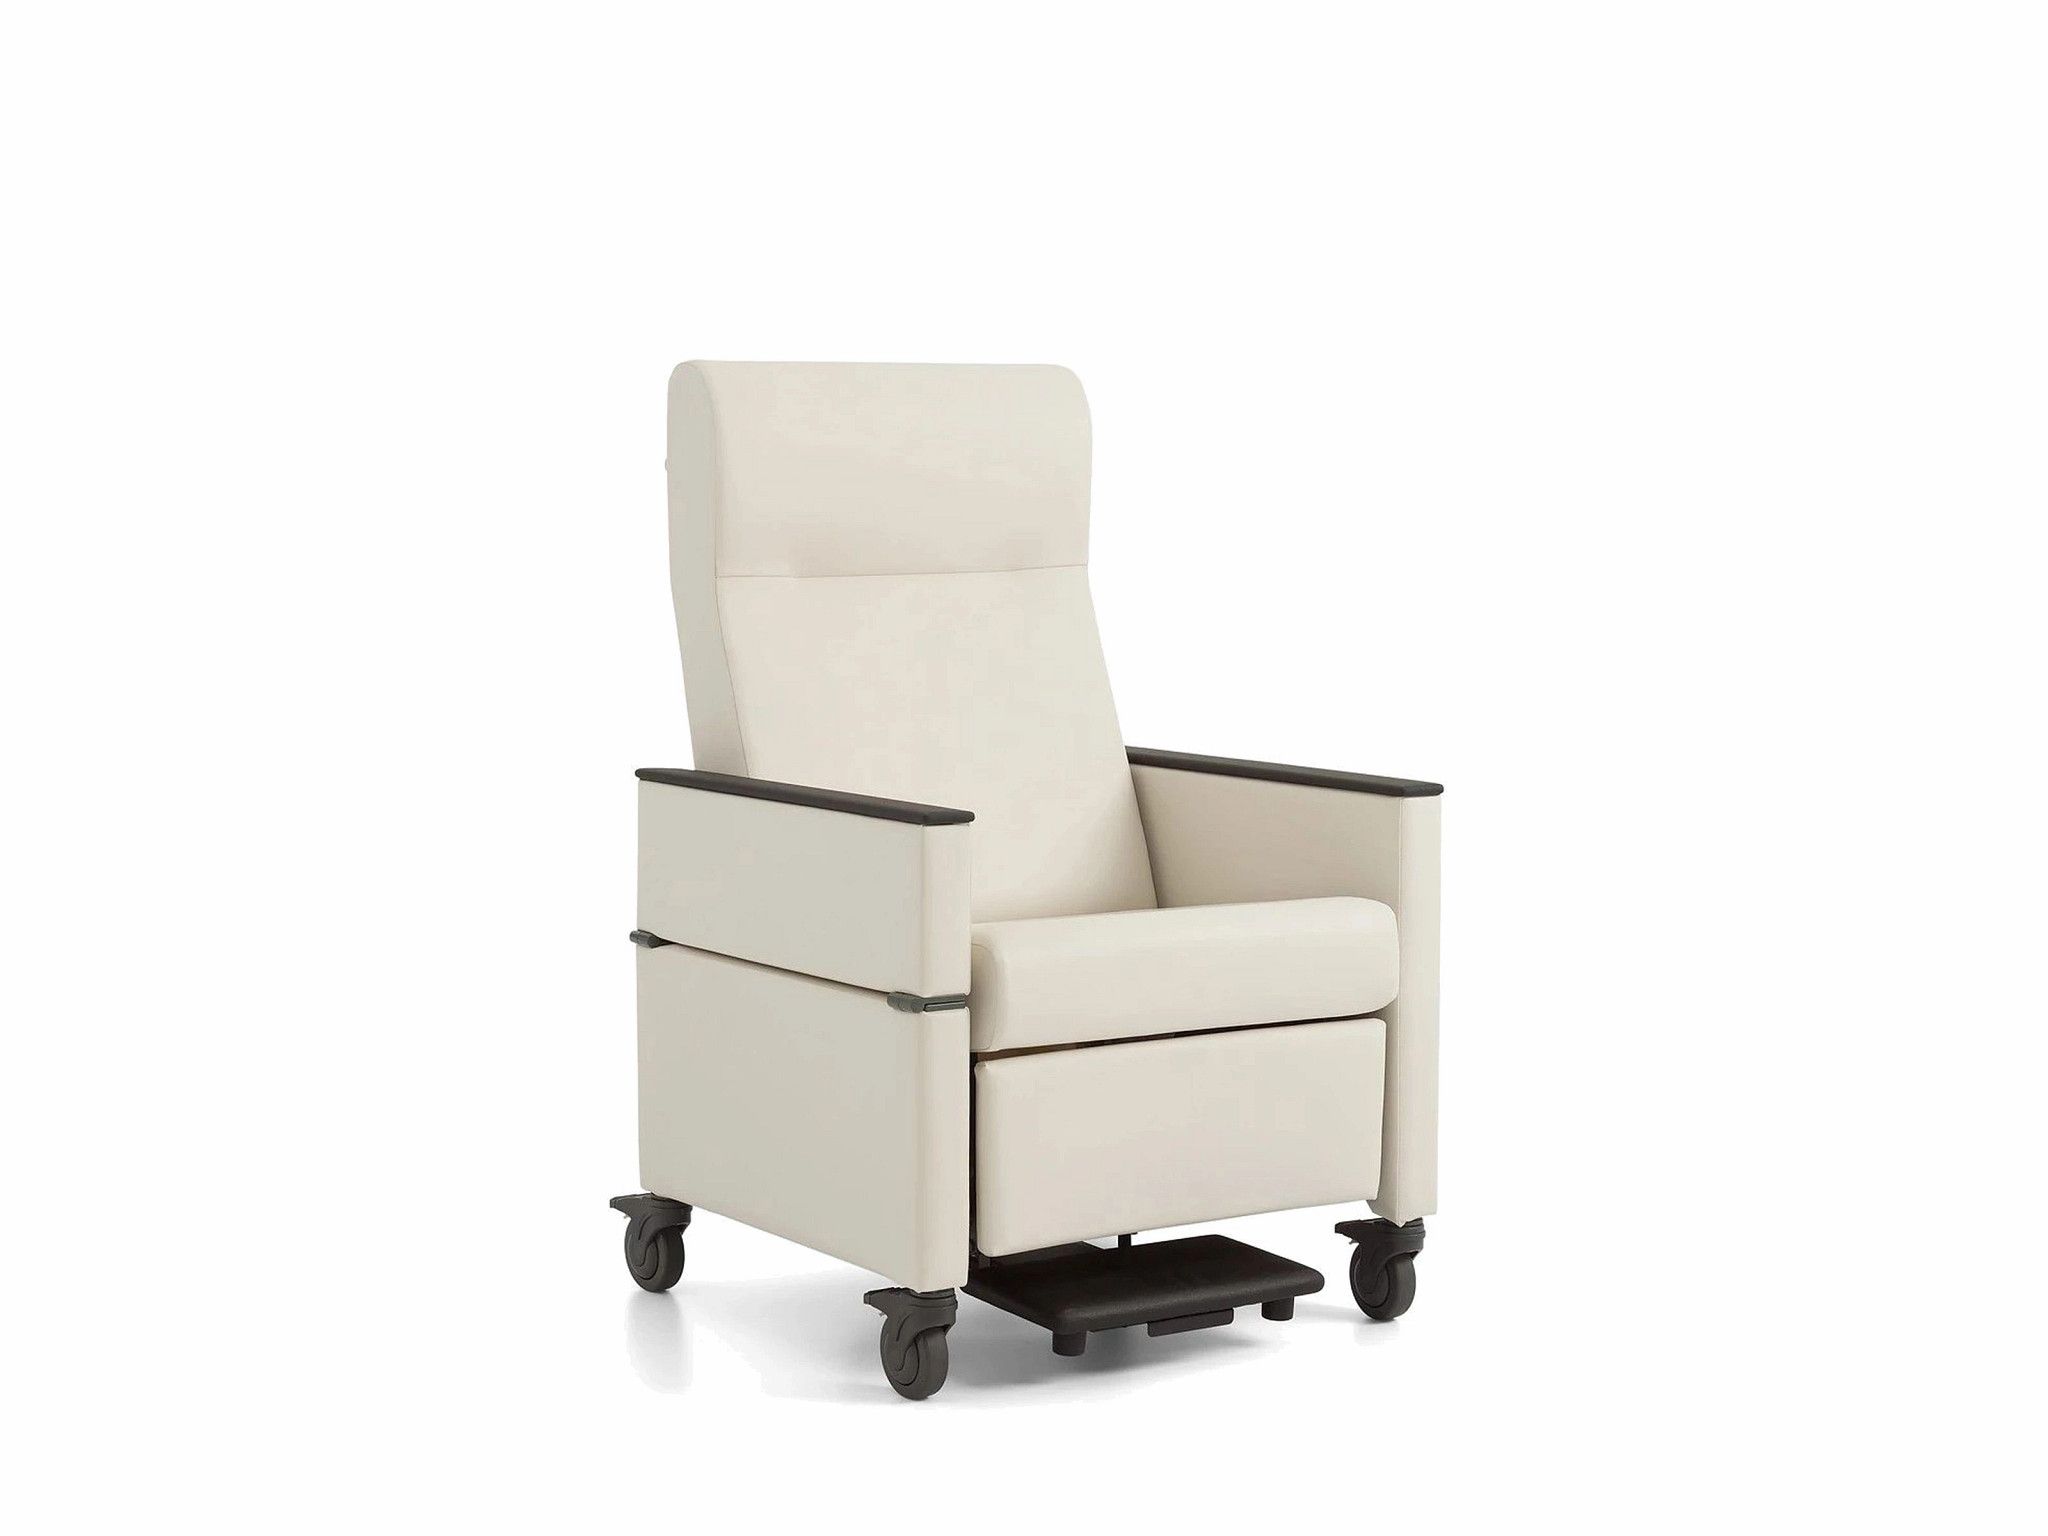 Healthcare Recliner Chairs: Medical-Grade Hospital Recliners